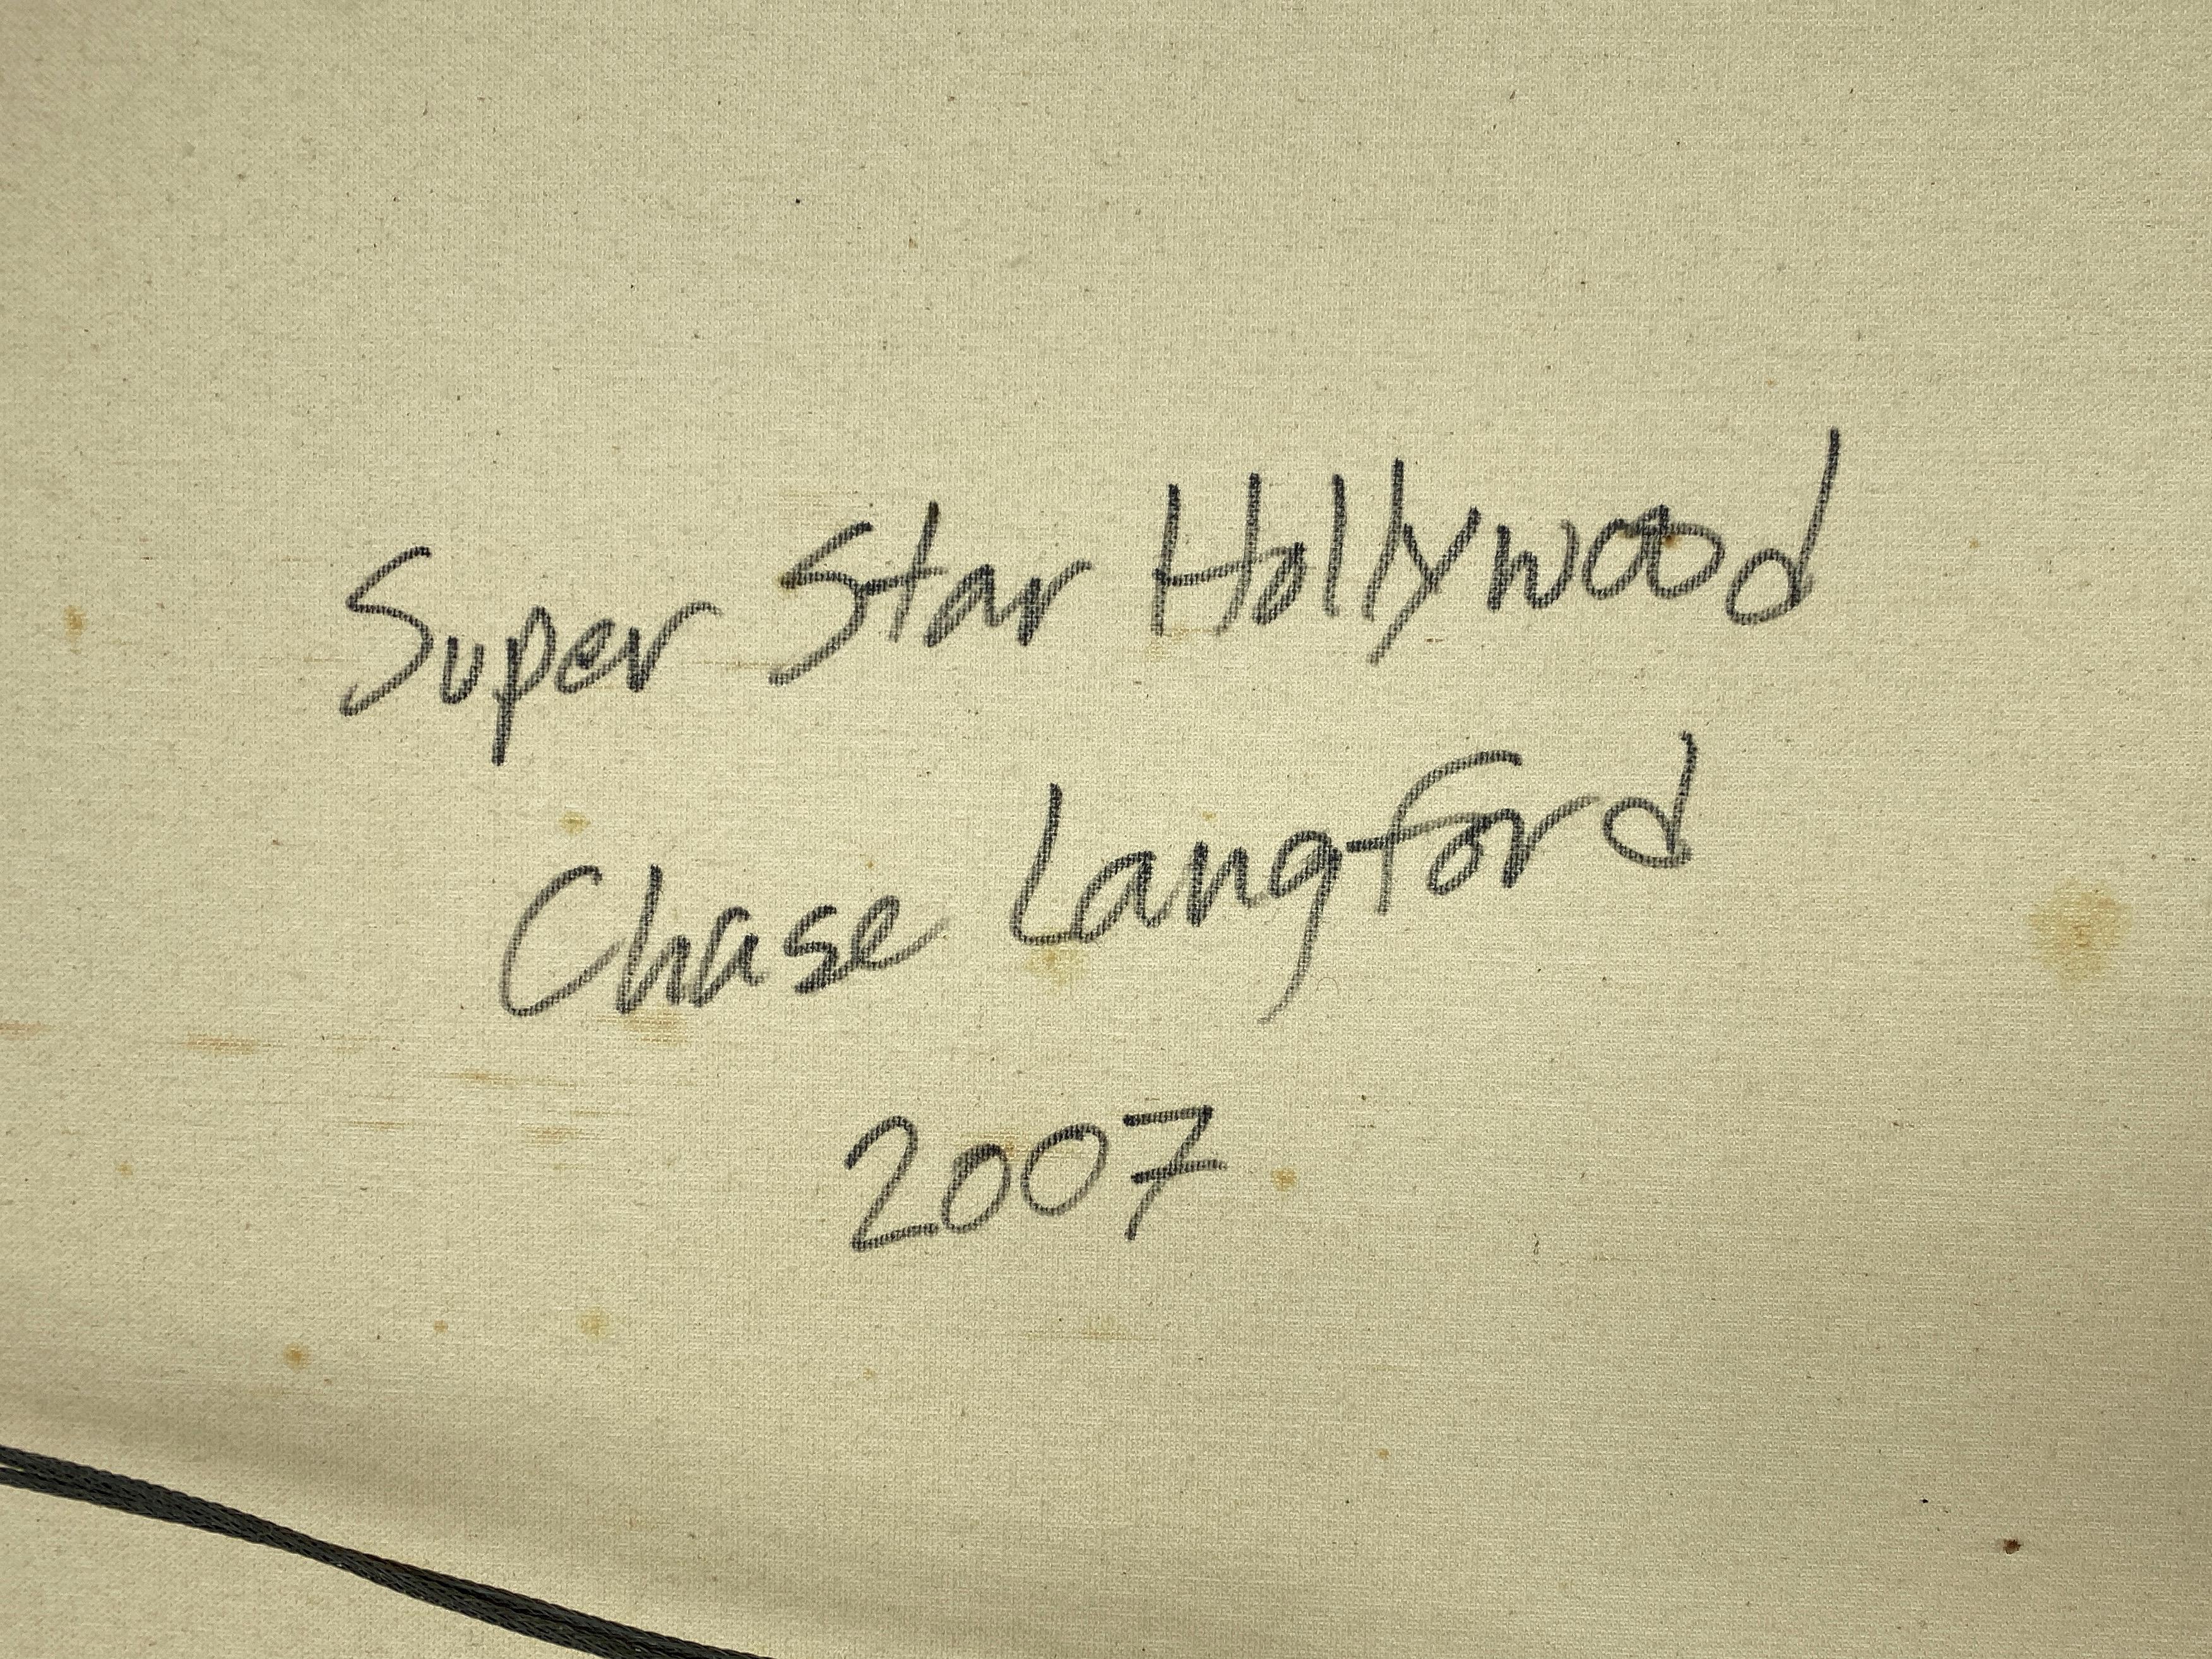 Chase Langford “Super Star Hollywood”, Monumental Mixed-Media Painting, 2007 11